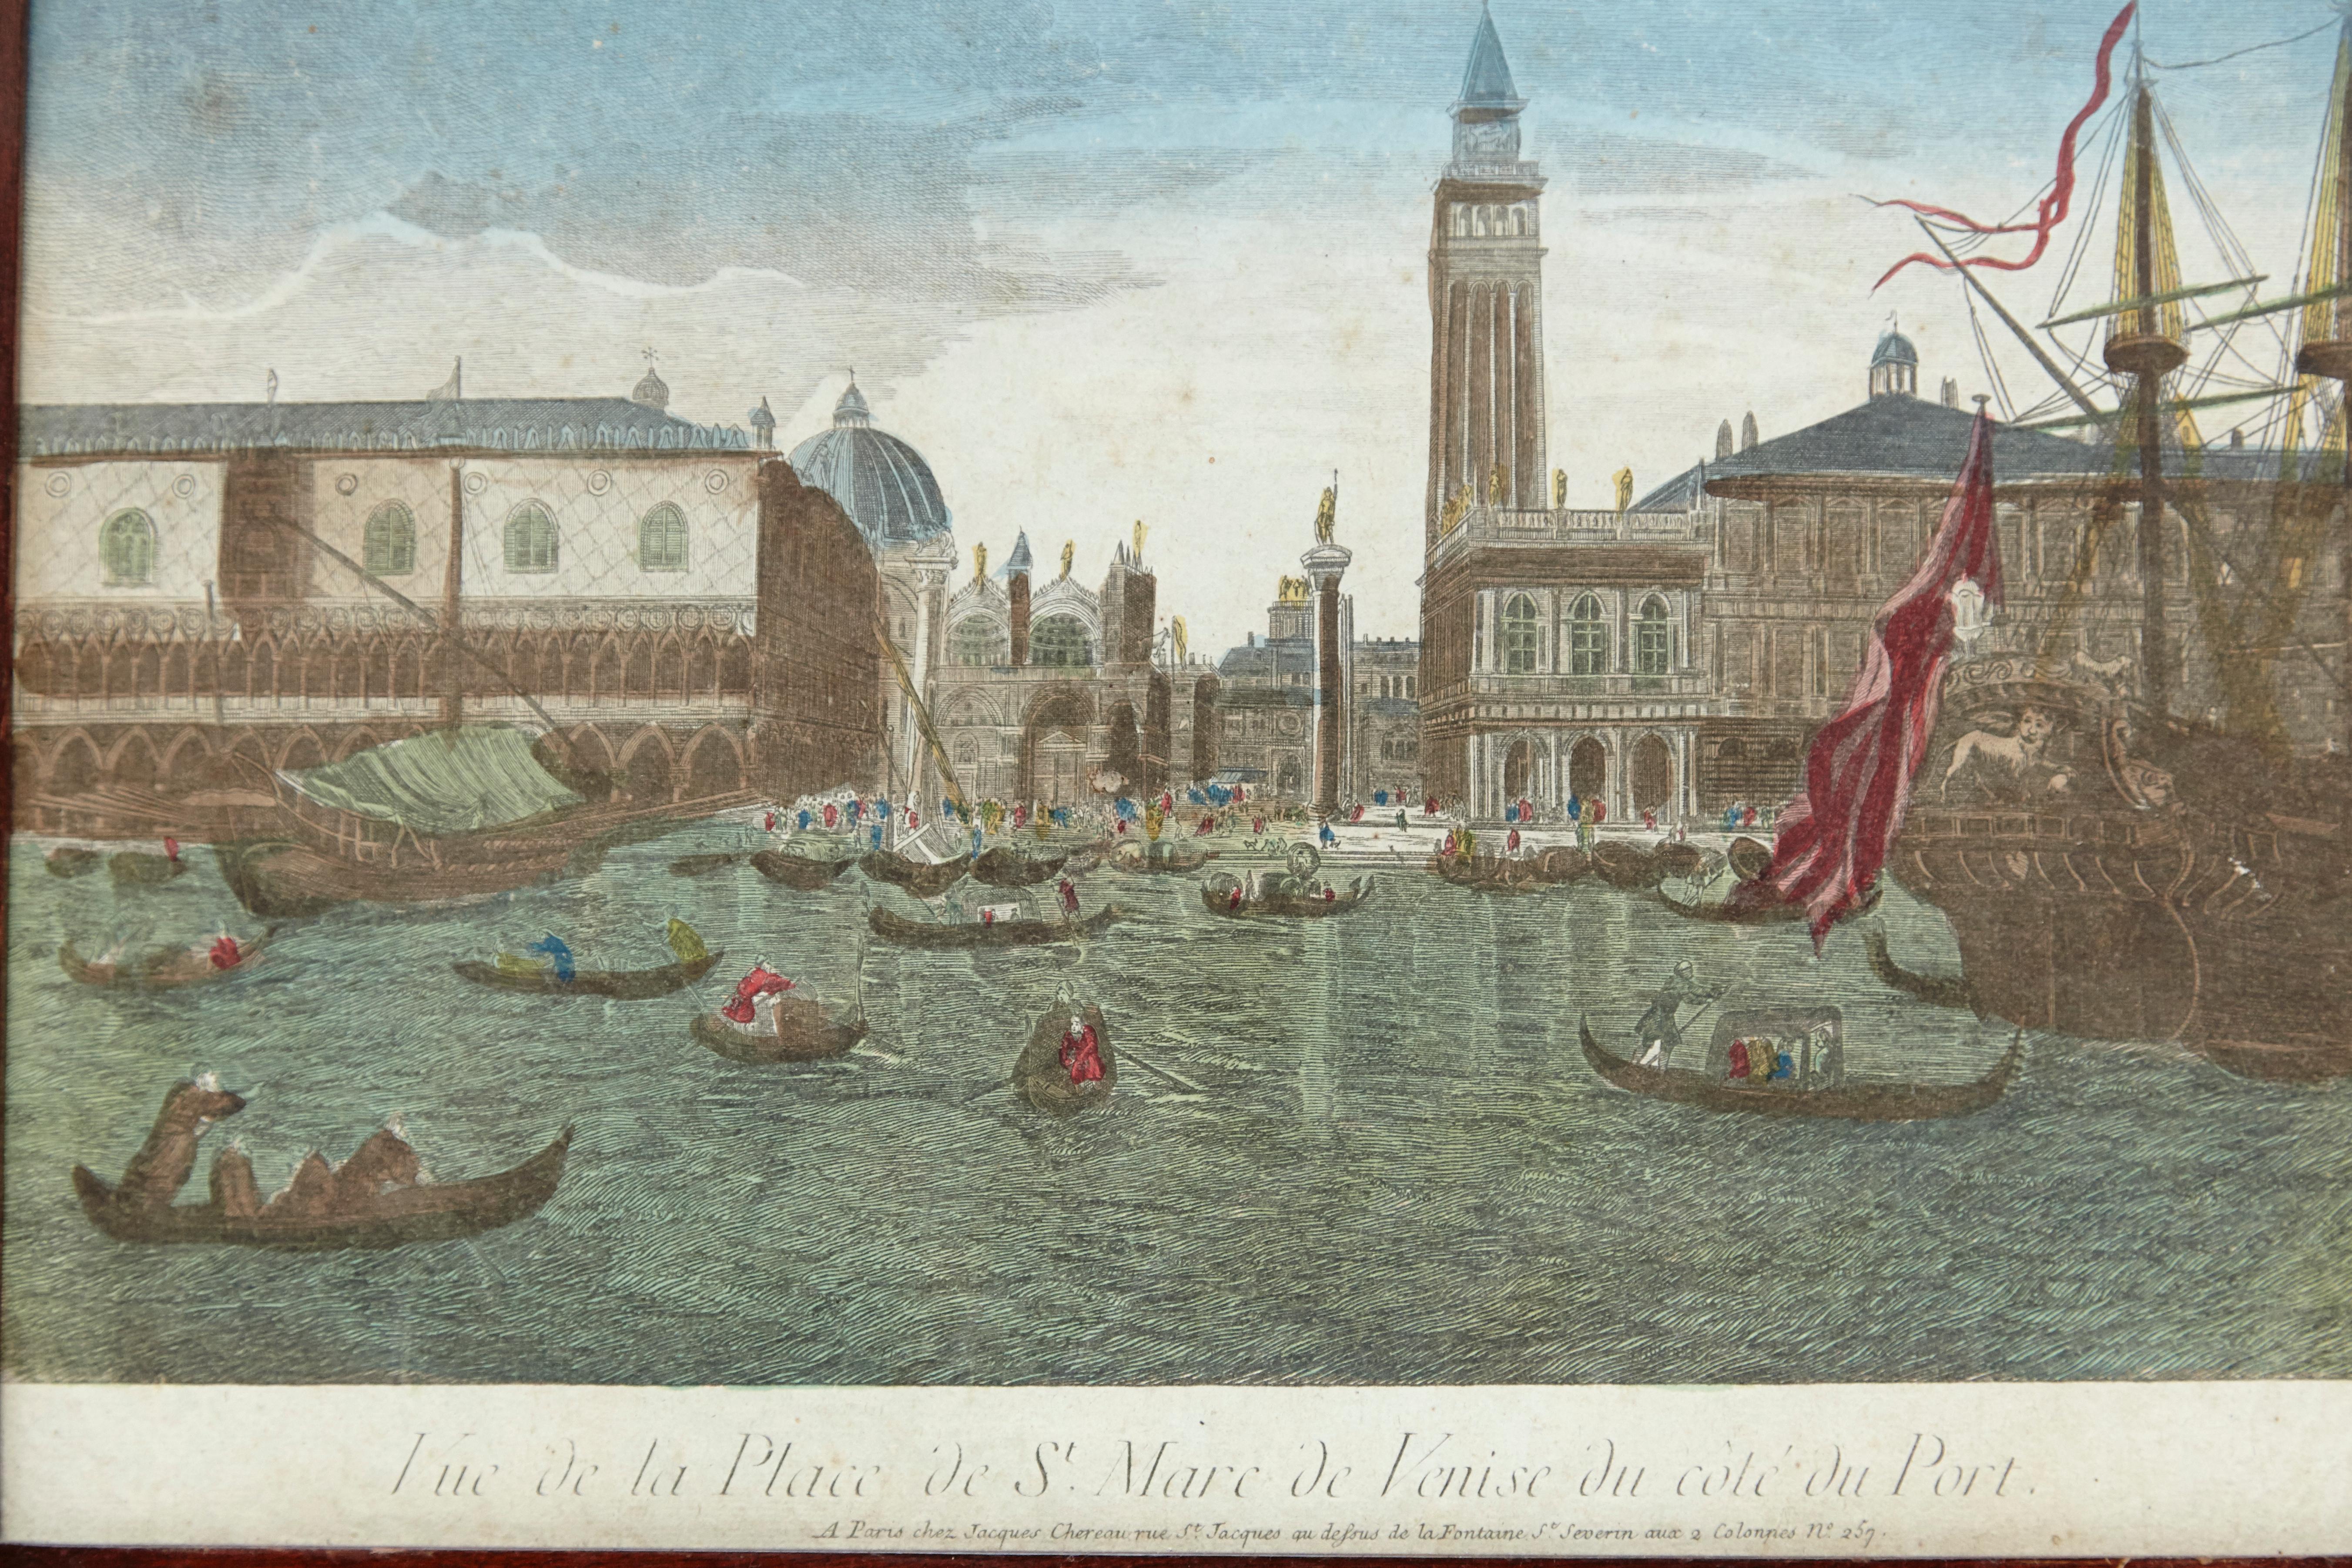 French Color Lithography of Venice, 18th Century